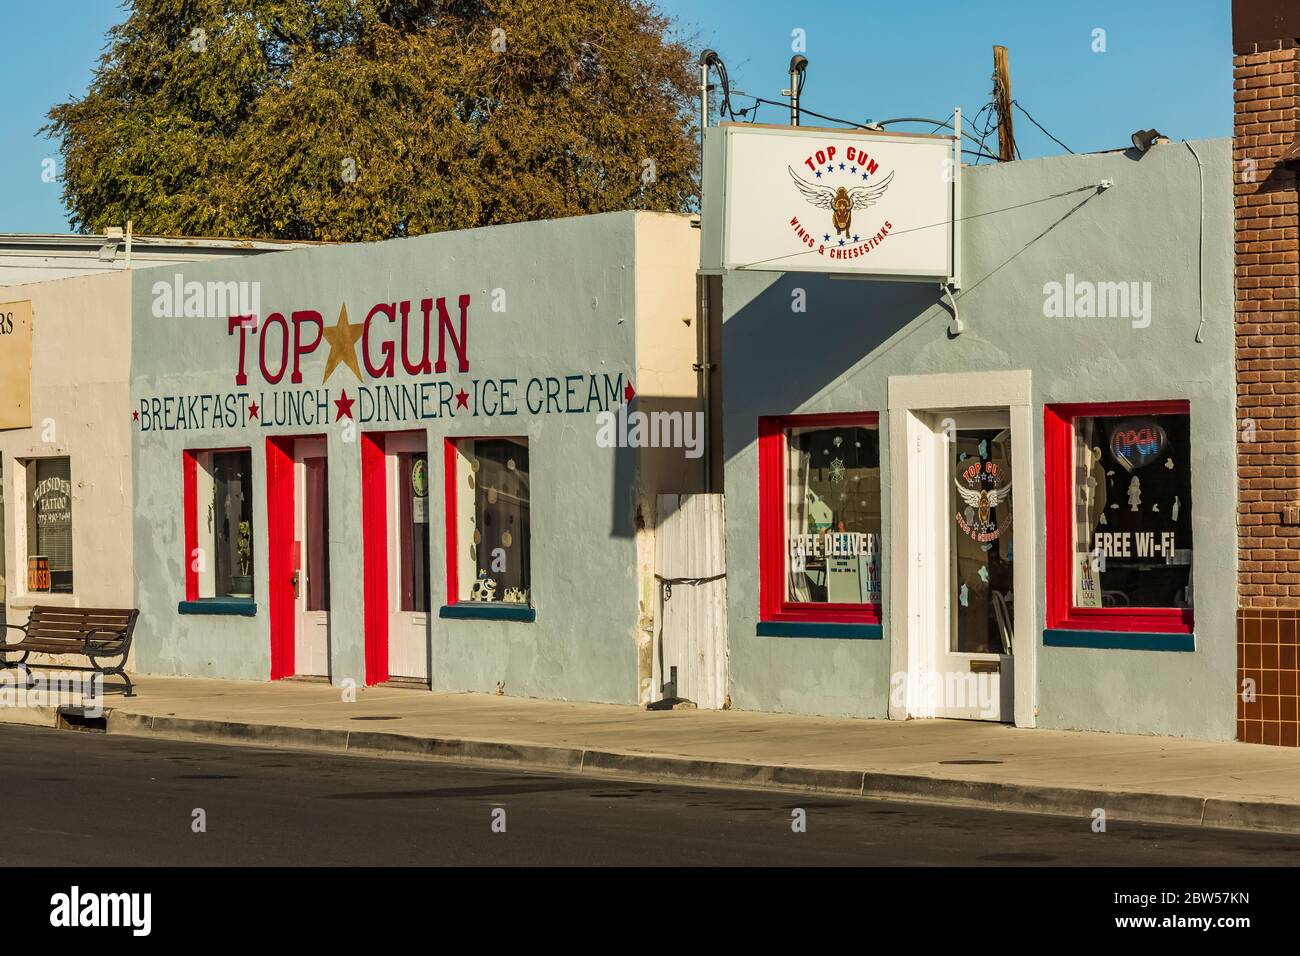 Top Gun Restaurant in Fallon, Nevada, USA [No property release; available for editorial licensing only] Stock Photo